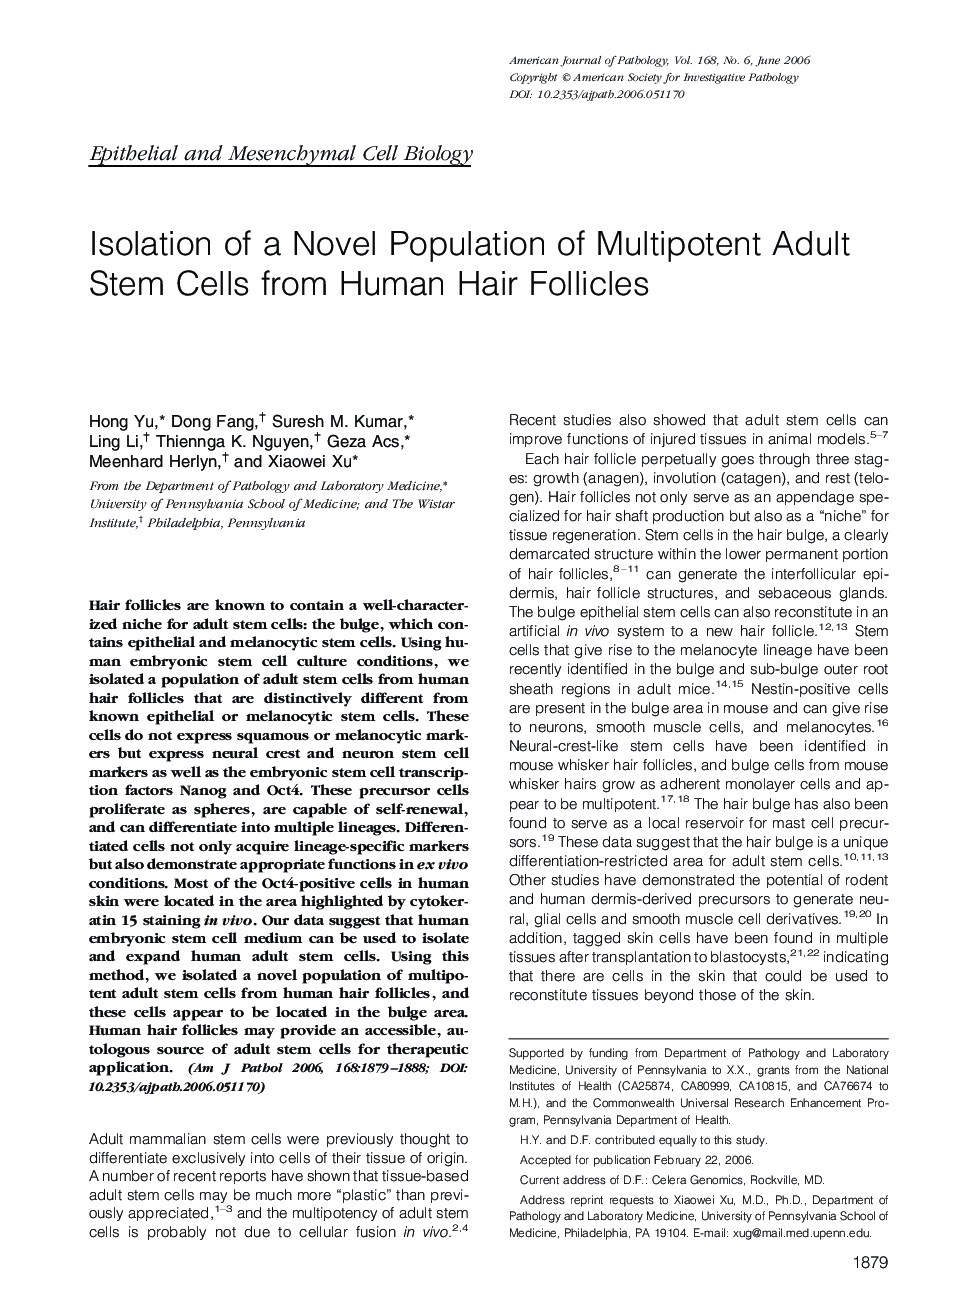 Isolation of a Novel Population of Multipotent Adult Stem Cells from Human Hair Follicles 